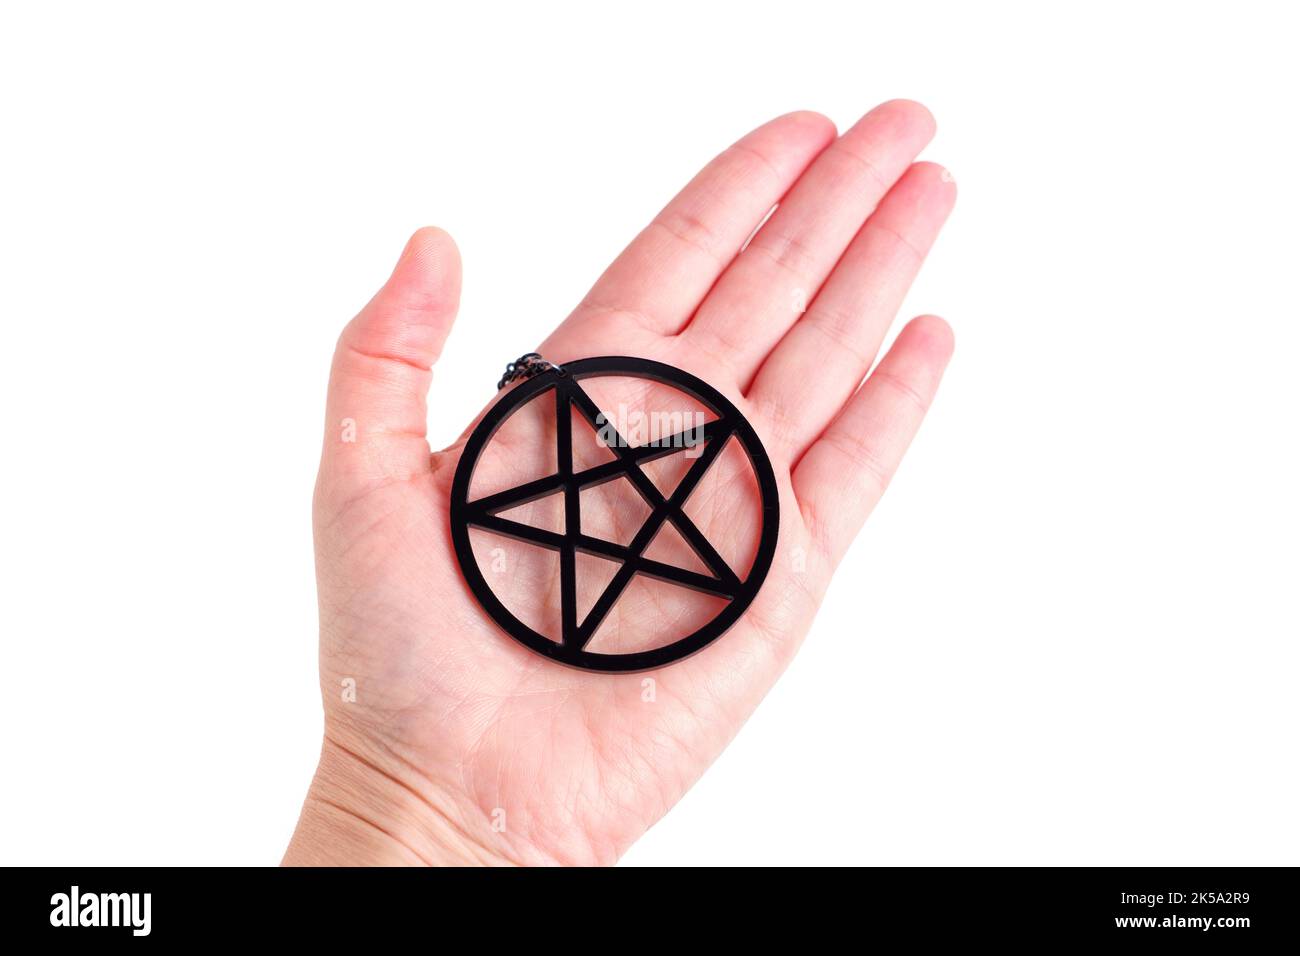 Large black pentagram shape placed on a hand palm isolated on white. Stock Photo